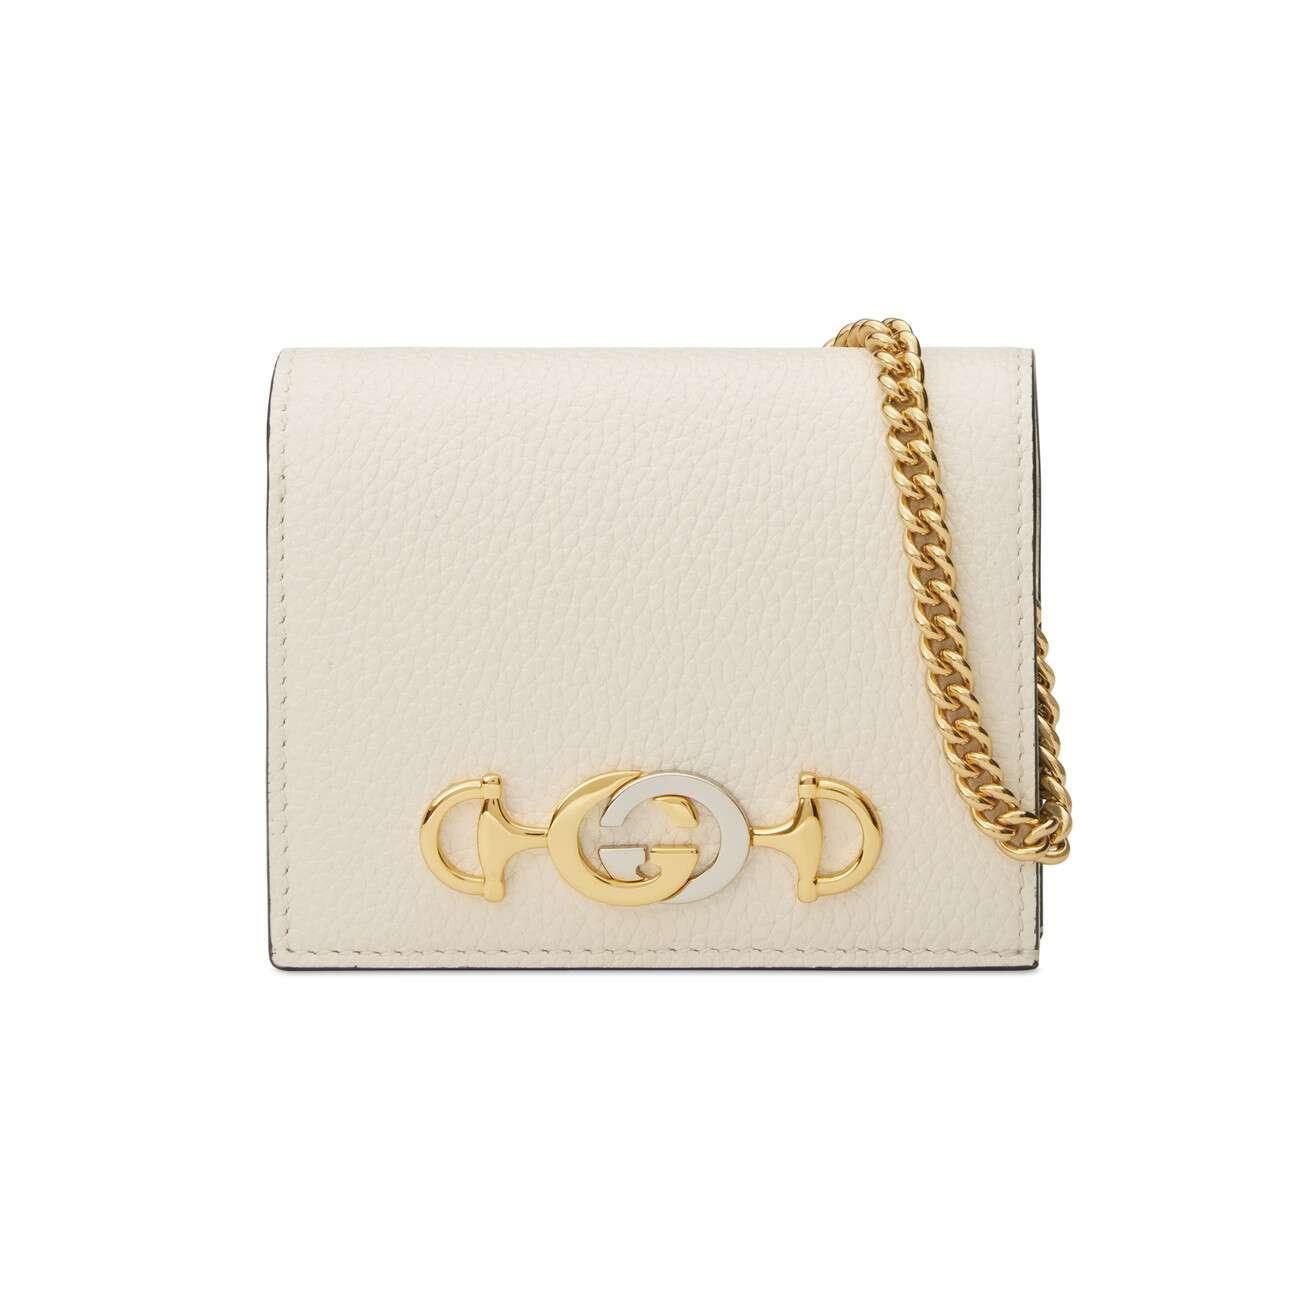 Gucci 655 Leather Wallet On A Chain in 